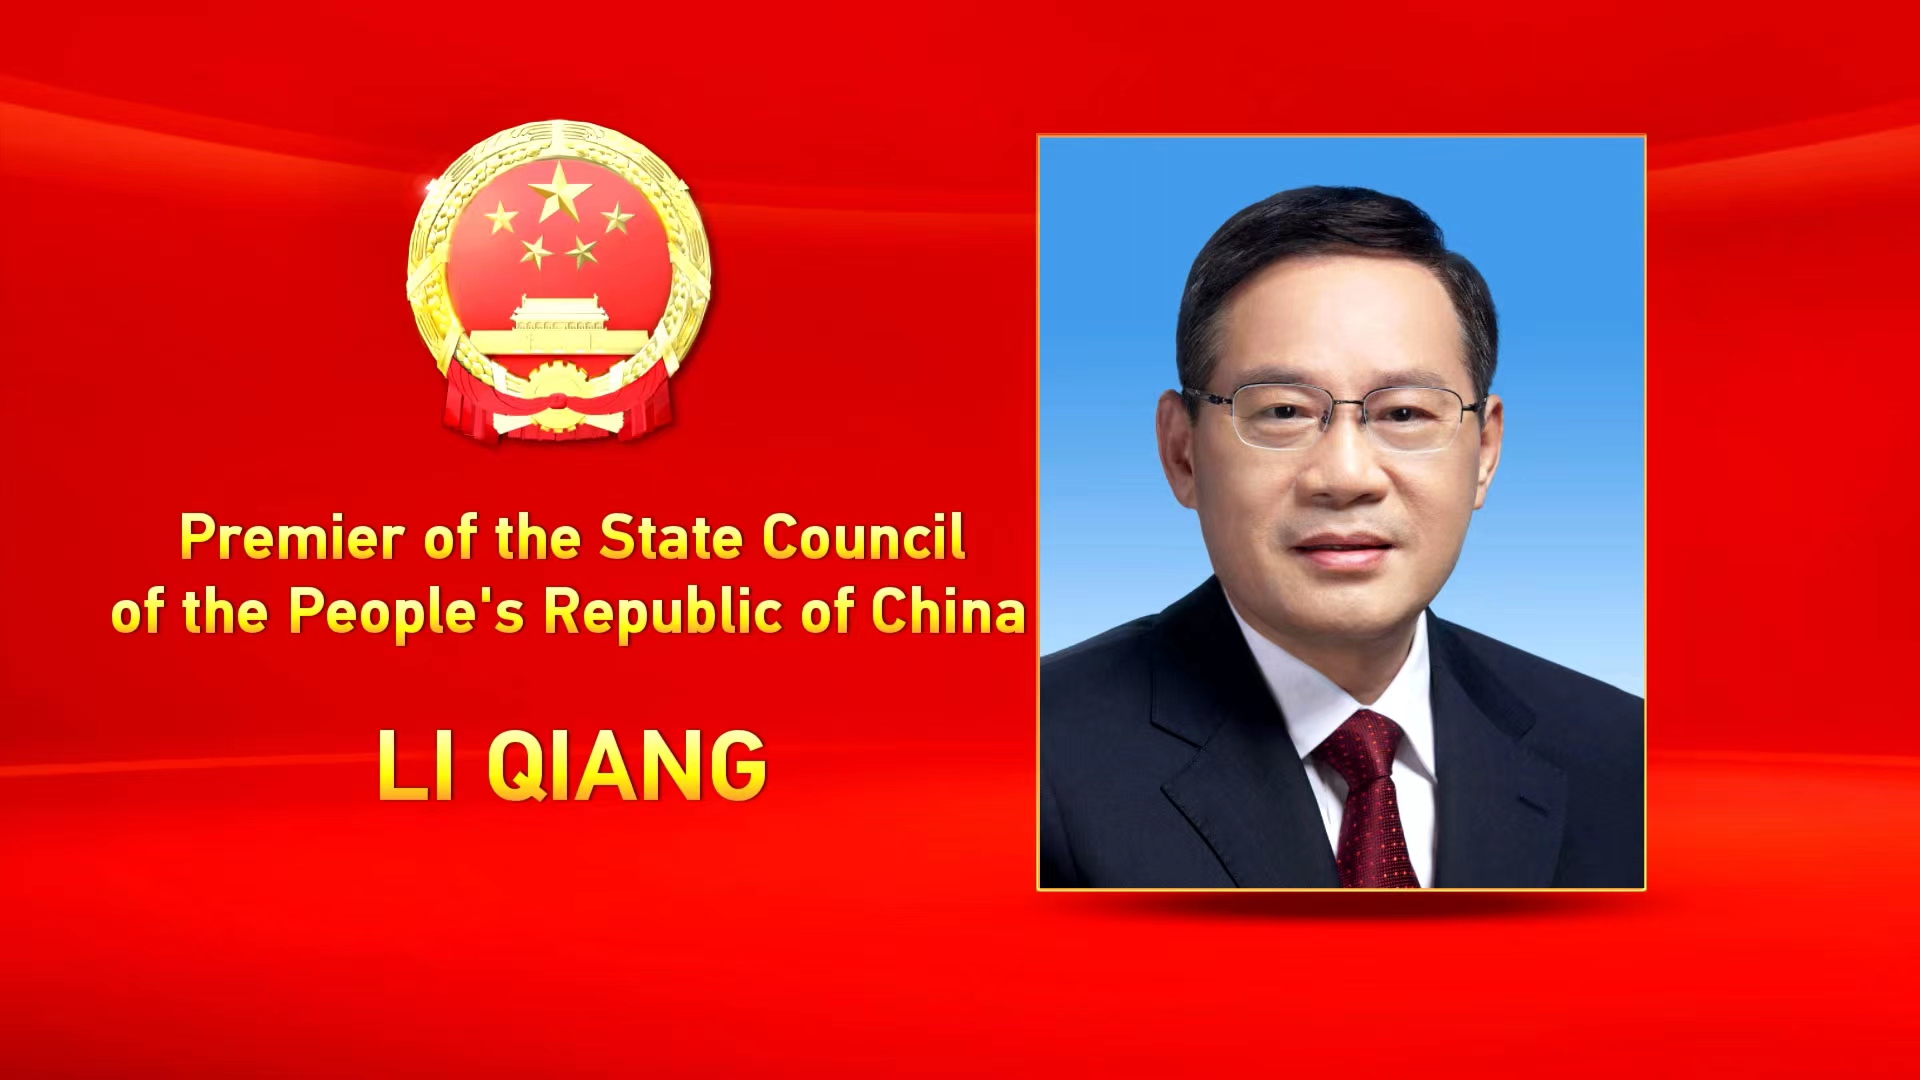 Brief introduction of Li Qiang – Premier of China's State Council